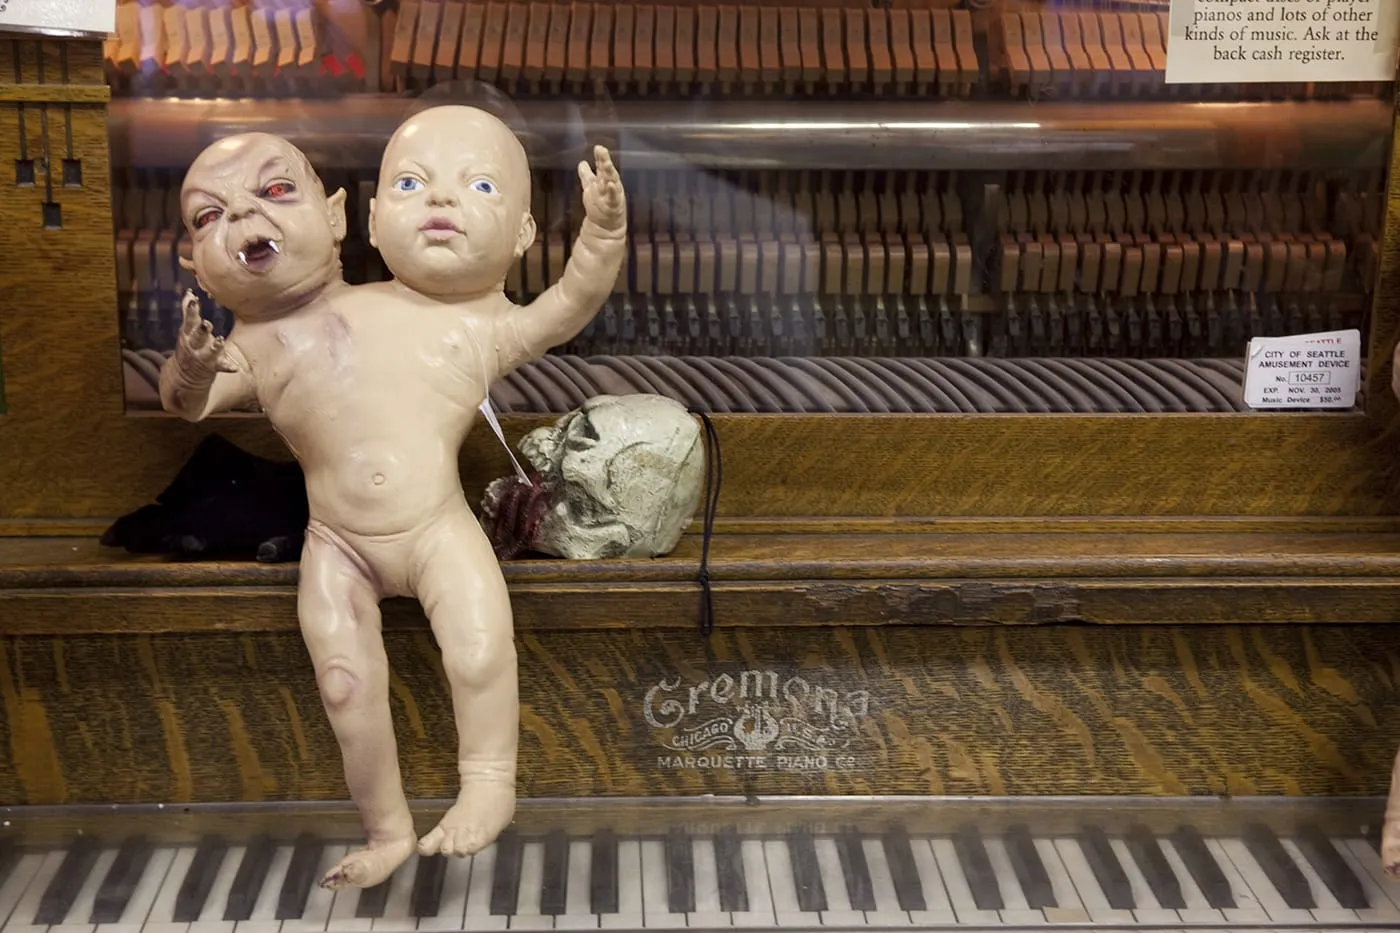 Two headed baby on a piano at Ye Olde Curiosity Shoppe in Seattle, Washington